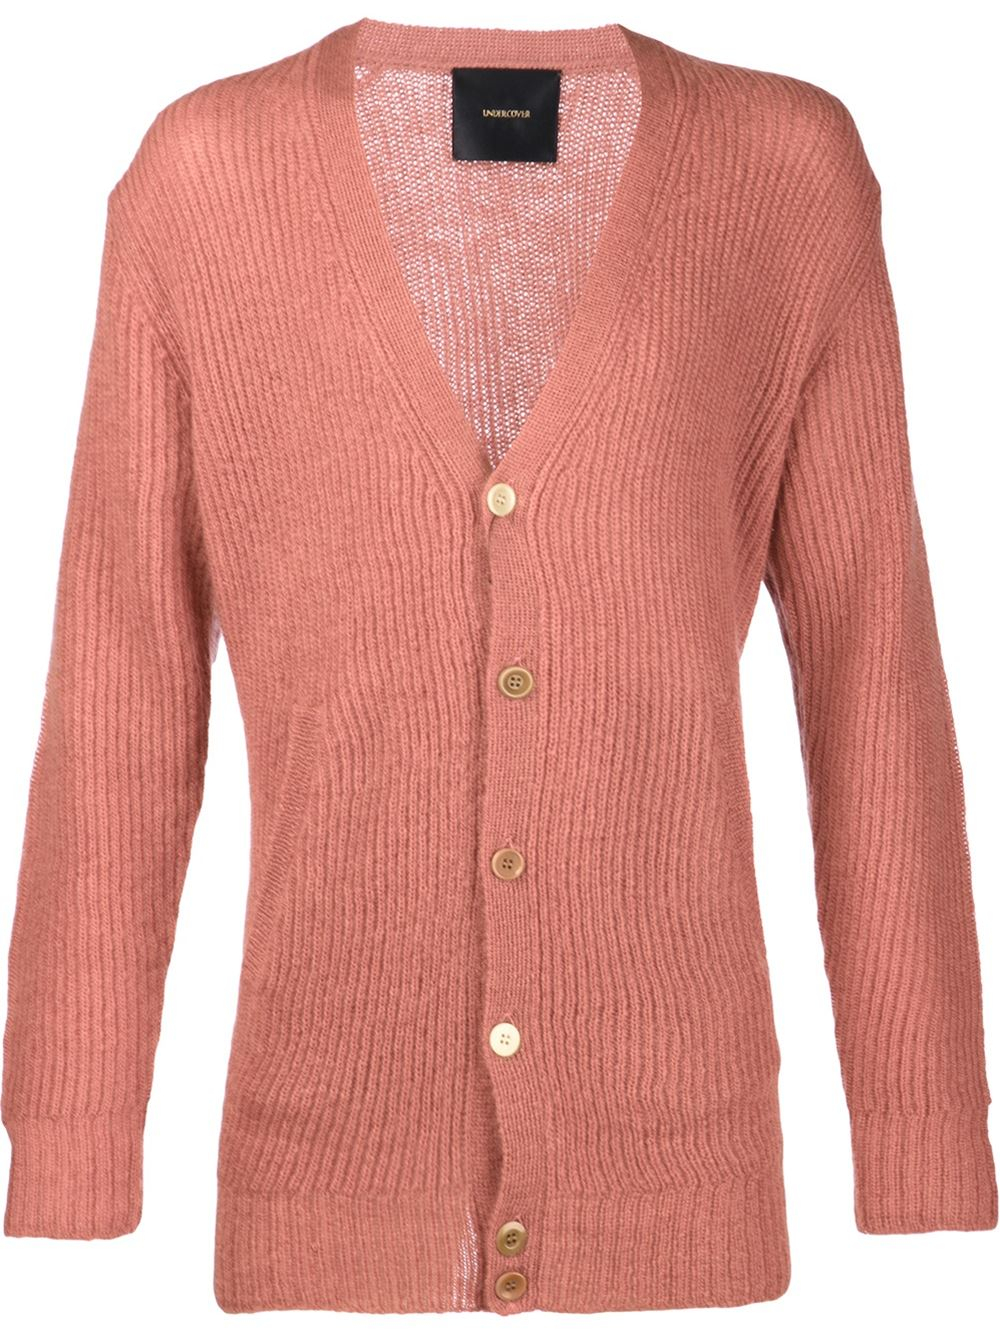 Undercover Ribbed Cardigan in Pink & Purple (Pink) for Men - Lyst